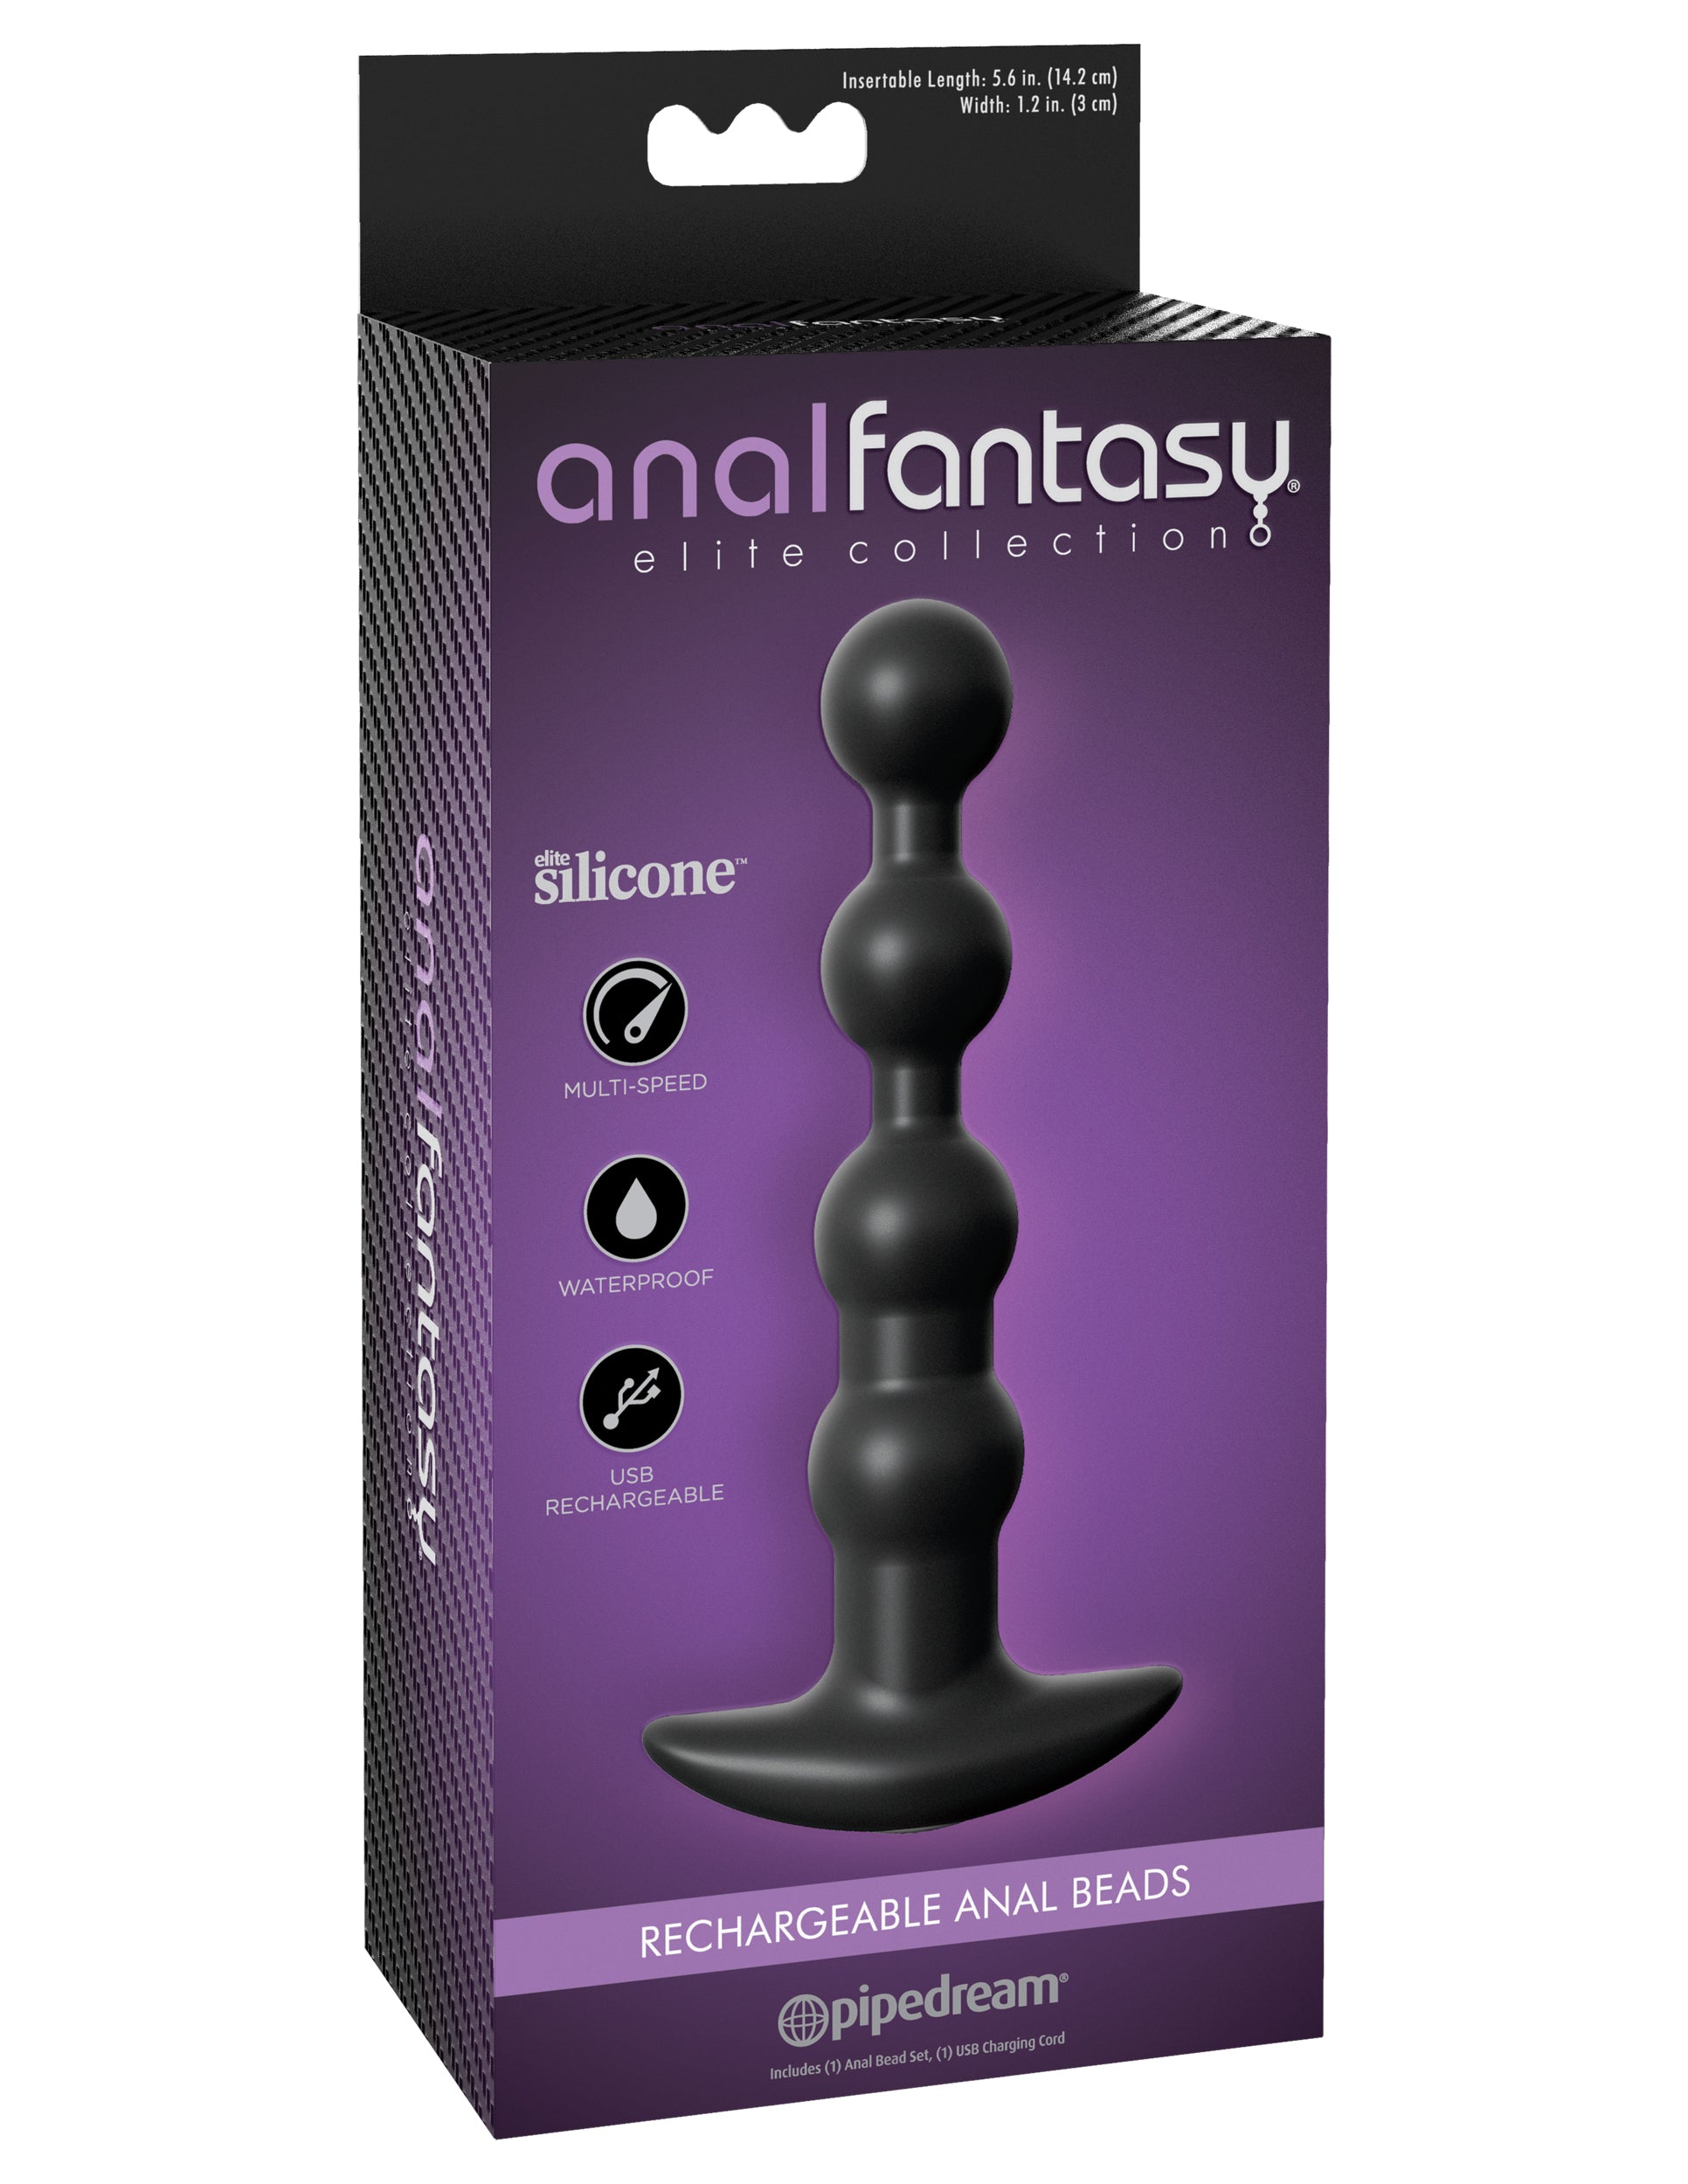 1932px x 2500px - Anal Fantasy Elite Rechargeable Anal Beads - Black â€“ Pipedream Products